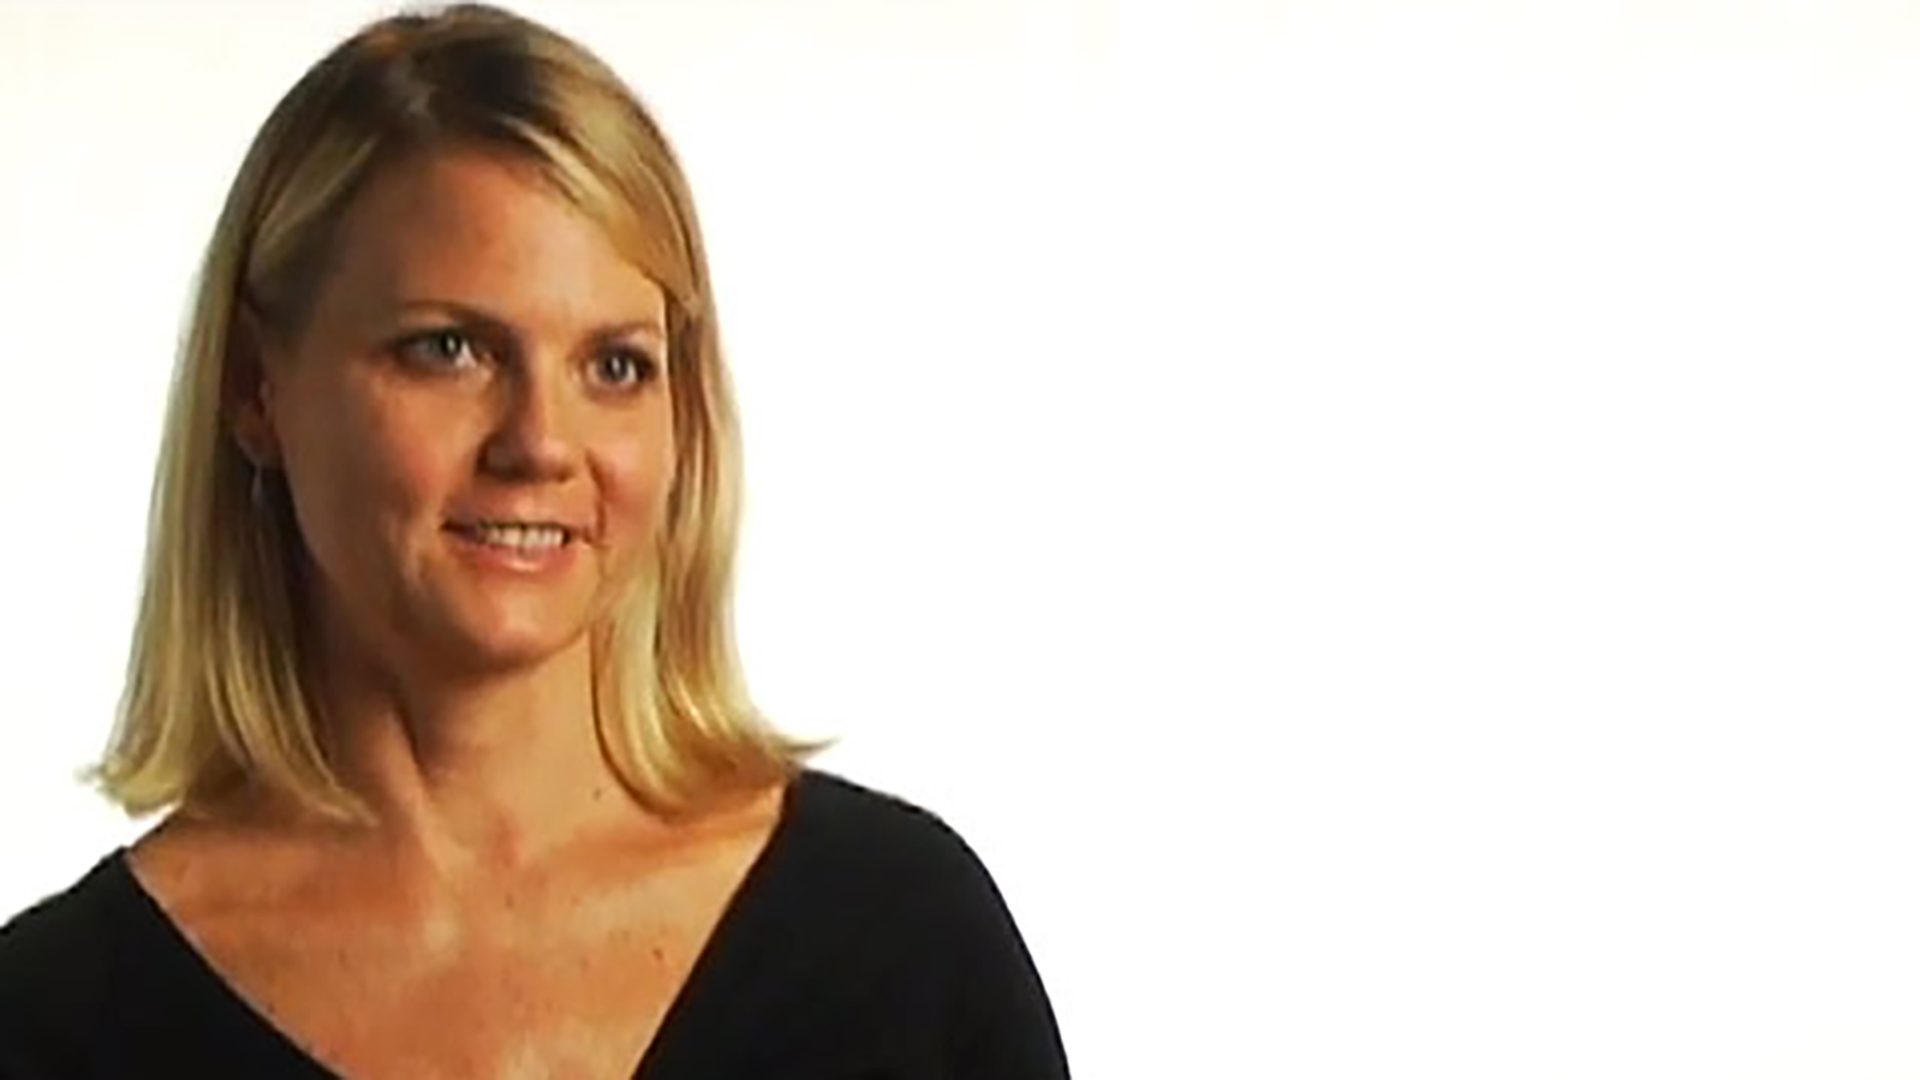 A blonde adult woman wearing a black V-neck shirt is interviewed against a white background.